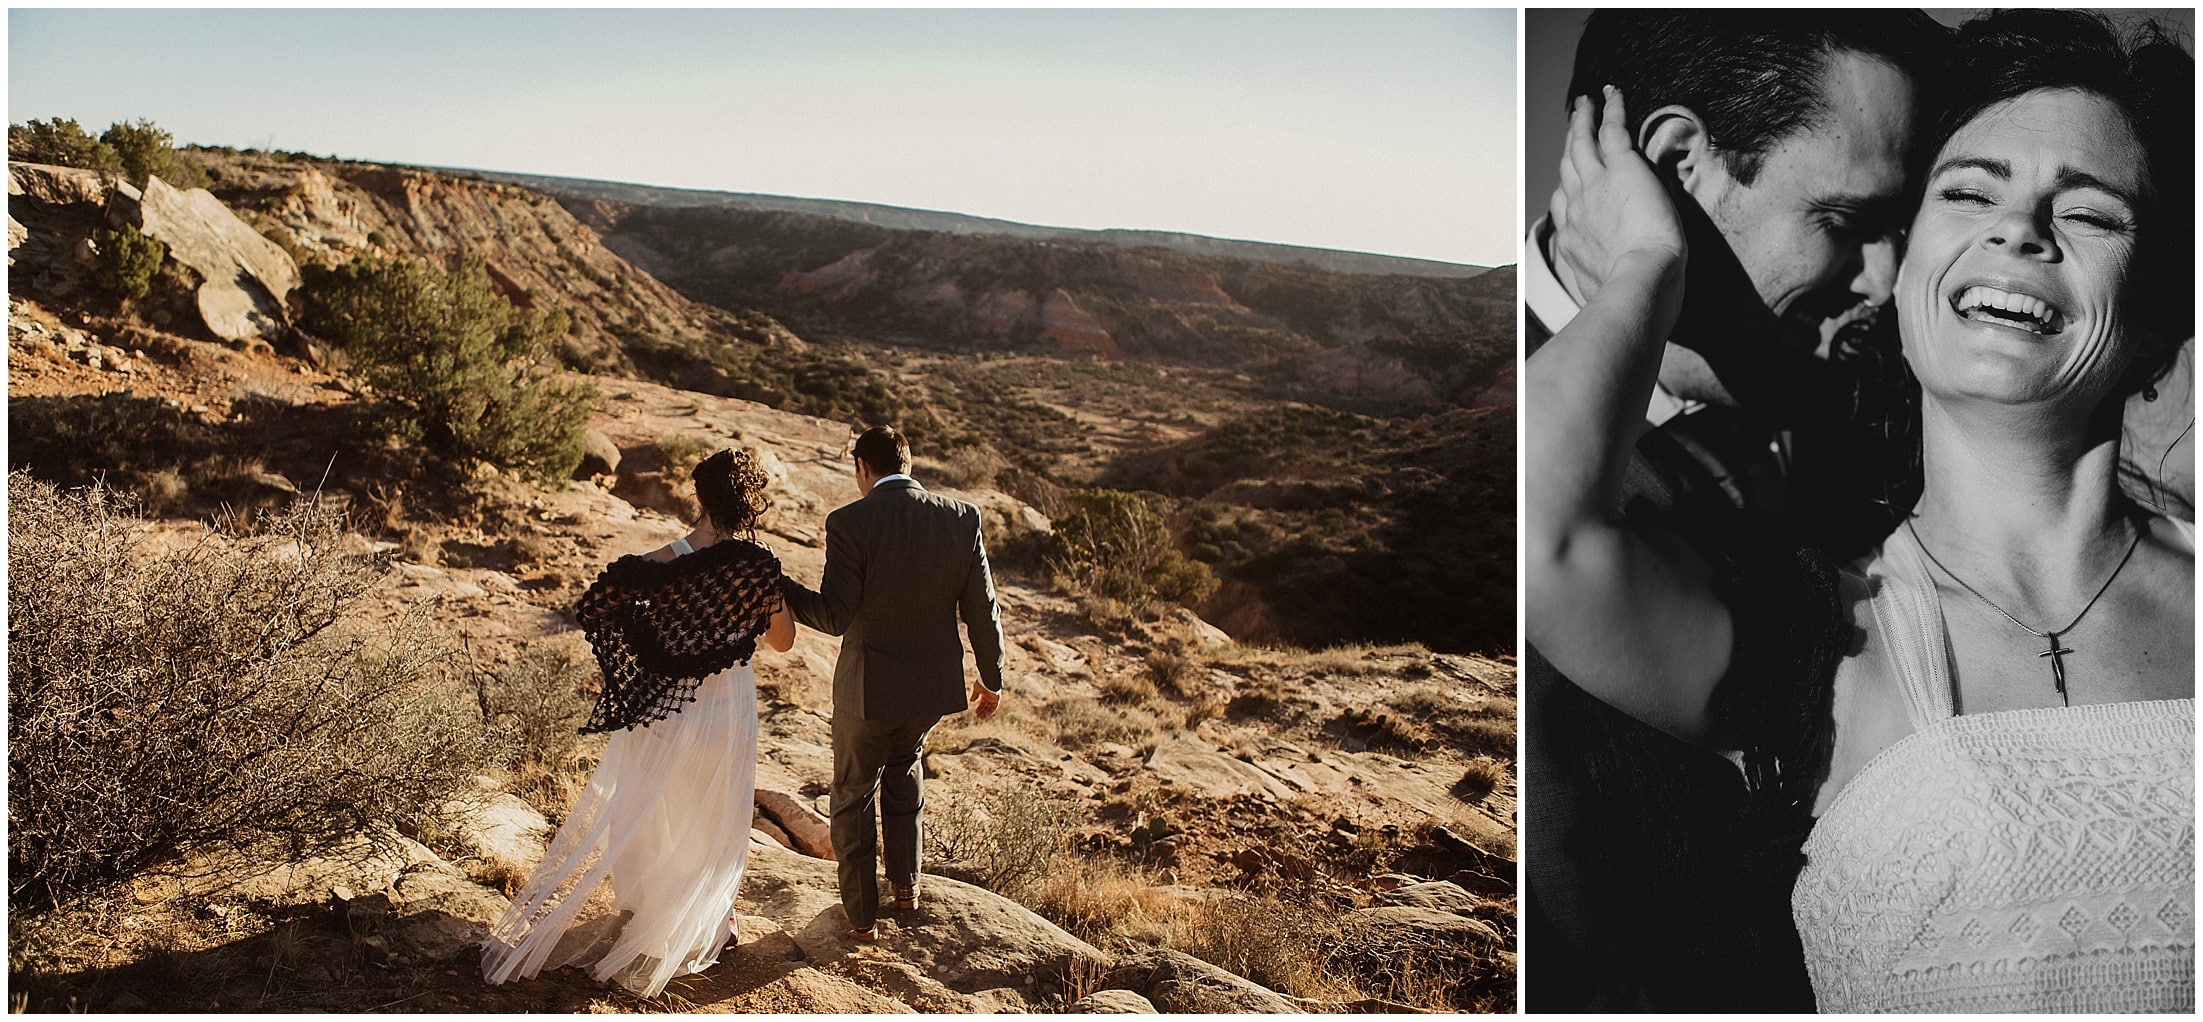 First Look, Photographer, photographer near me, wedding photographer, Blame Her Ranch, New Mexico Photographer, Old Gringo Boots, David's Bridal, Stagehead Designs, Brit Nicole Photography, styled wedding, intimate, Day After, Palo Duro Canyon, Amarillo Photographer, Texas Wedding Photographer 